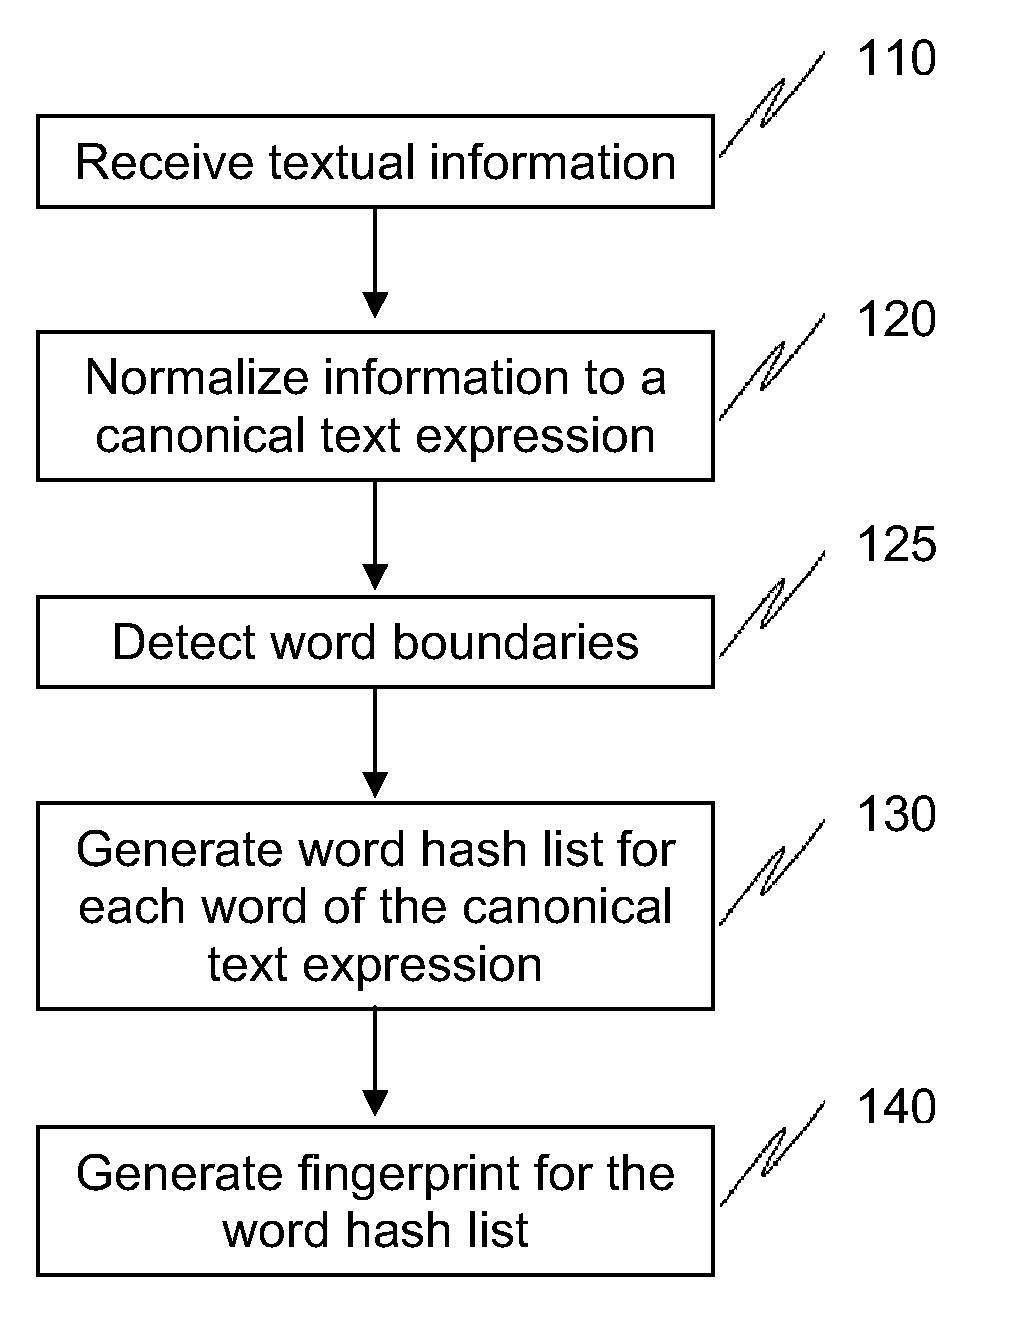 Methods and systems to fingerprint textual information using word runs